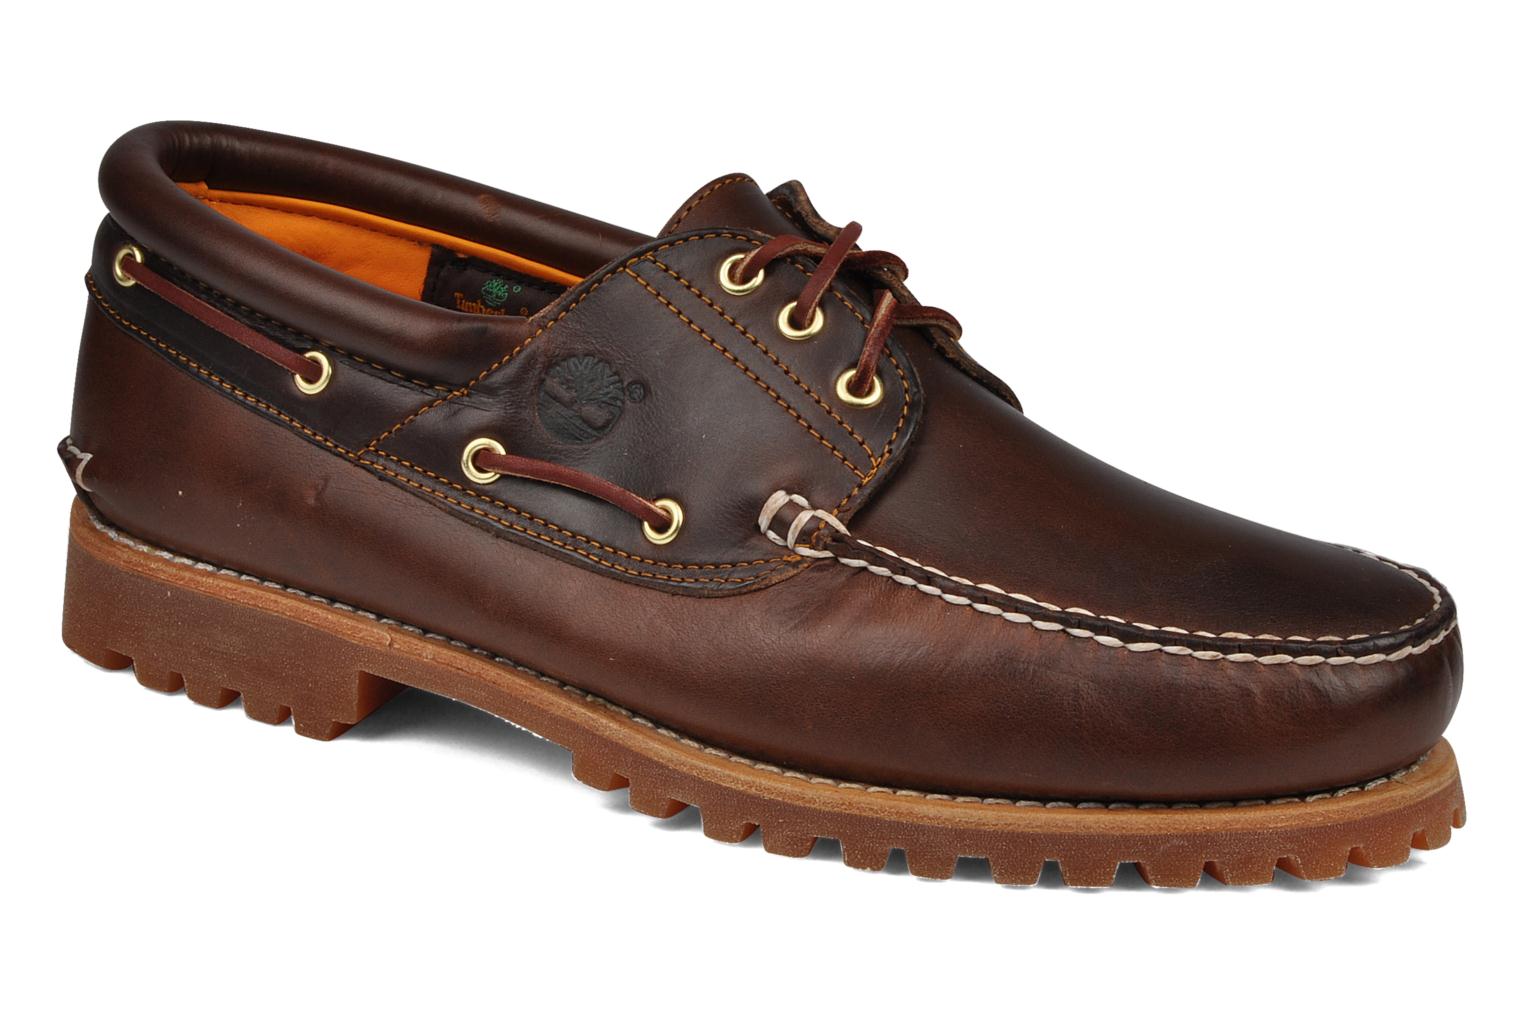 Timberland Authentics FTM 3 Eye Classic Lug Lace-up shoes in Brown at Sarenza.co.uk (45100)